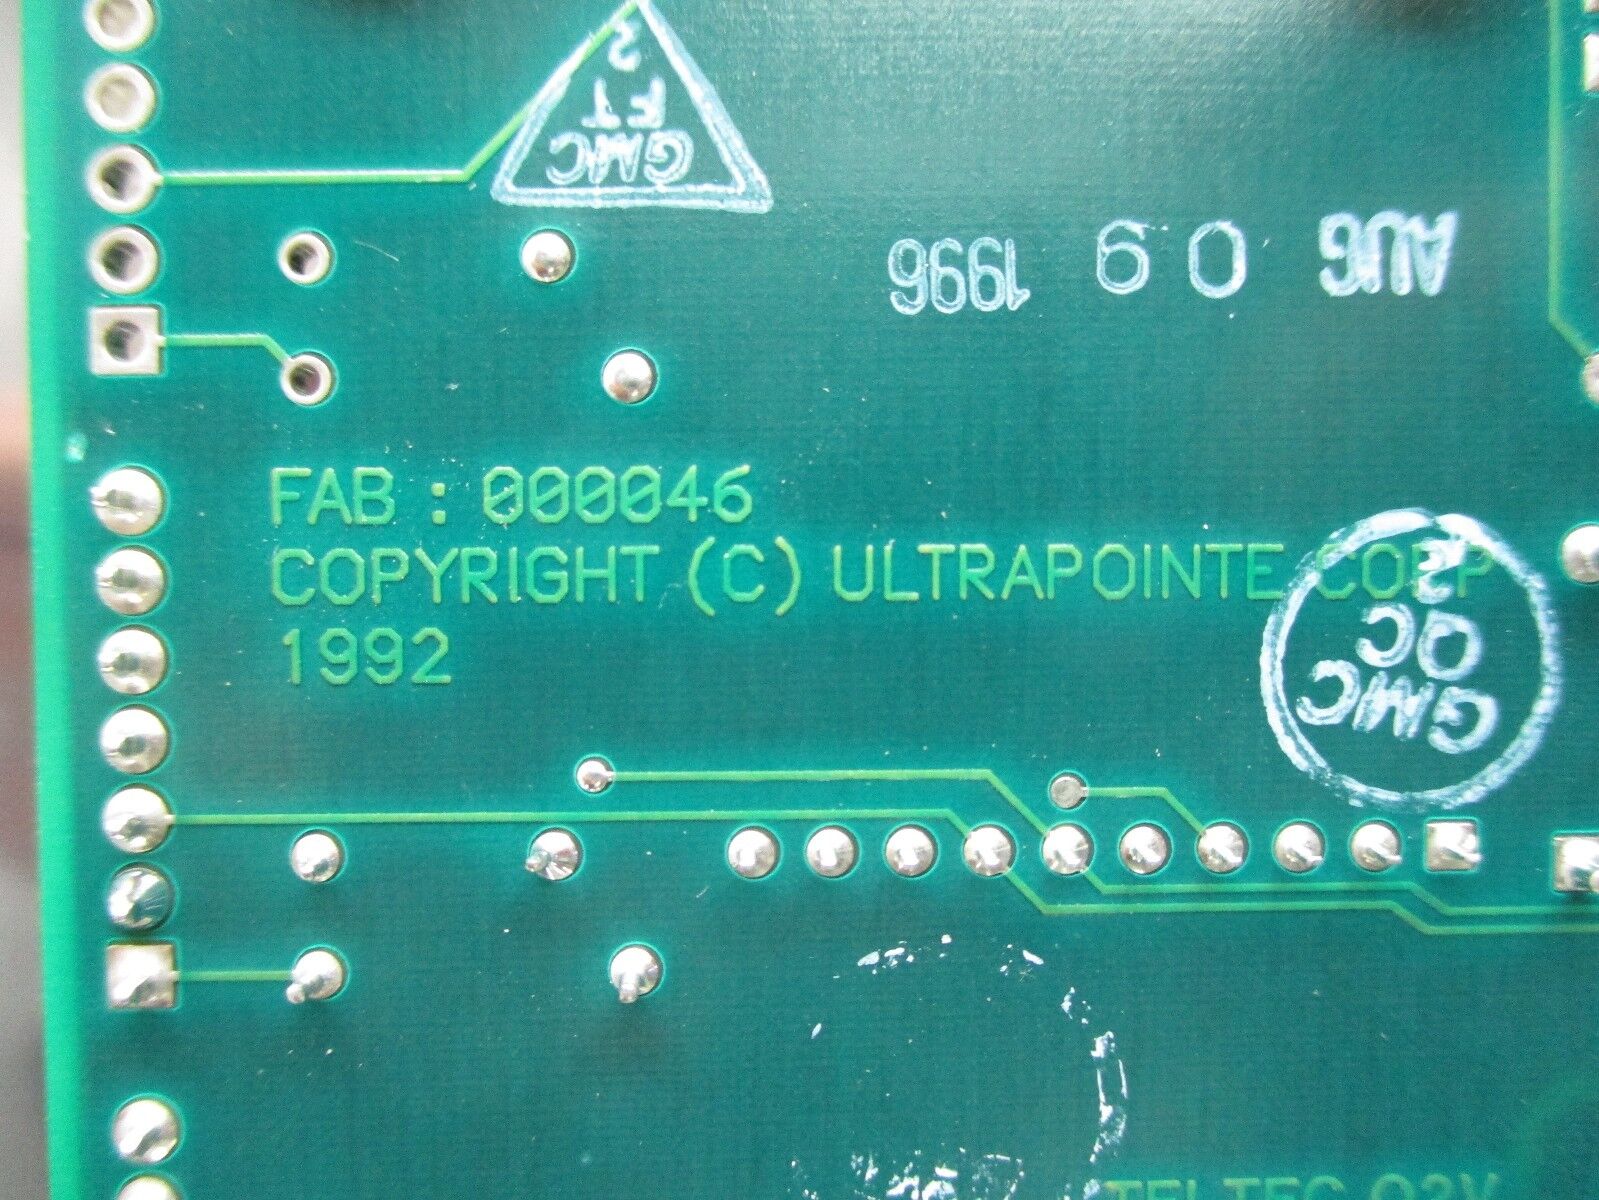 Ultrapointe 801-1002-01 BF/DF Control Motor Driver PCB 000675 Used Working